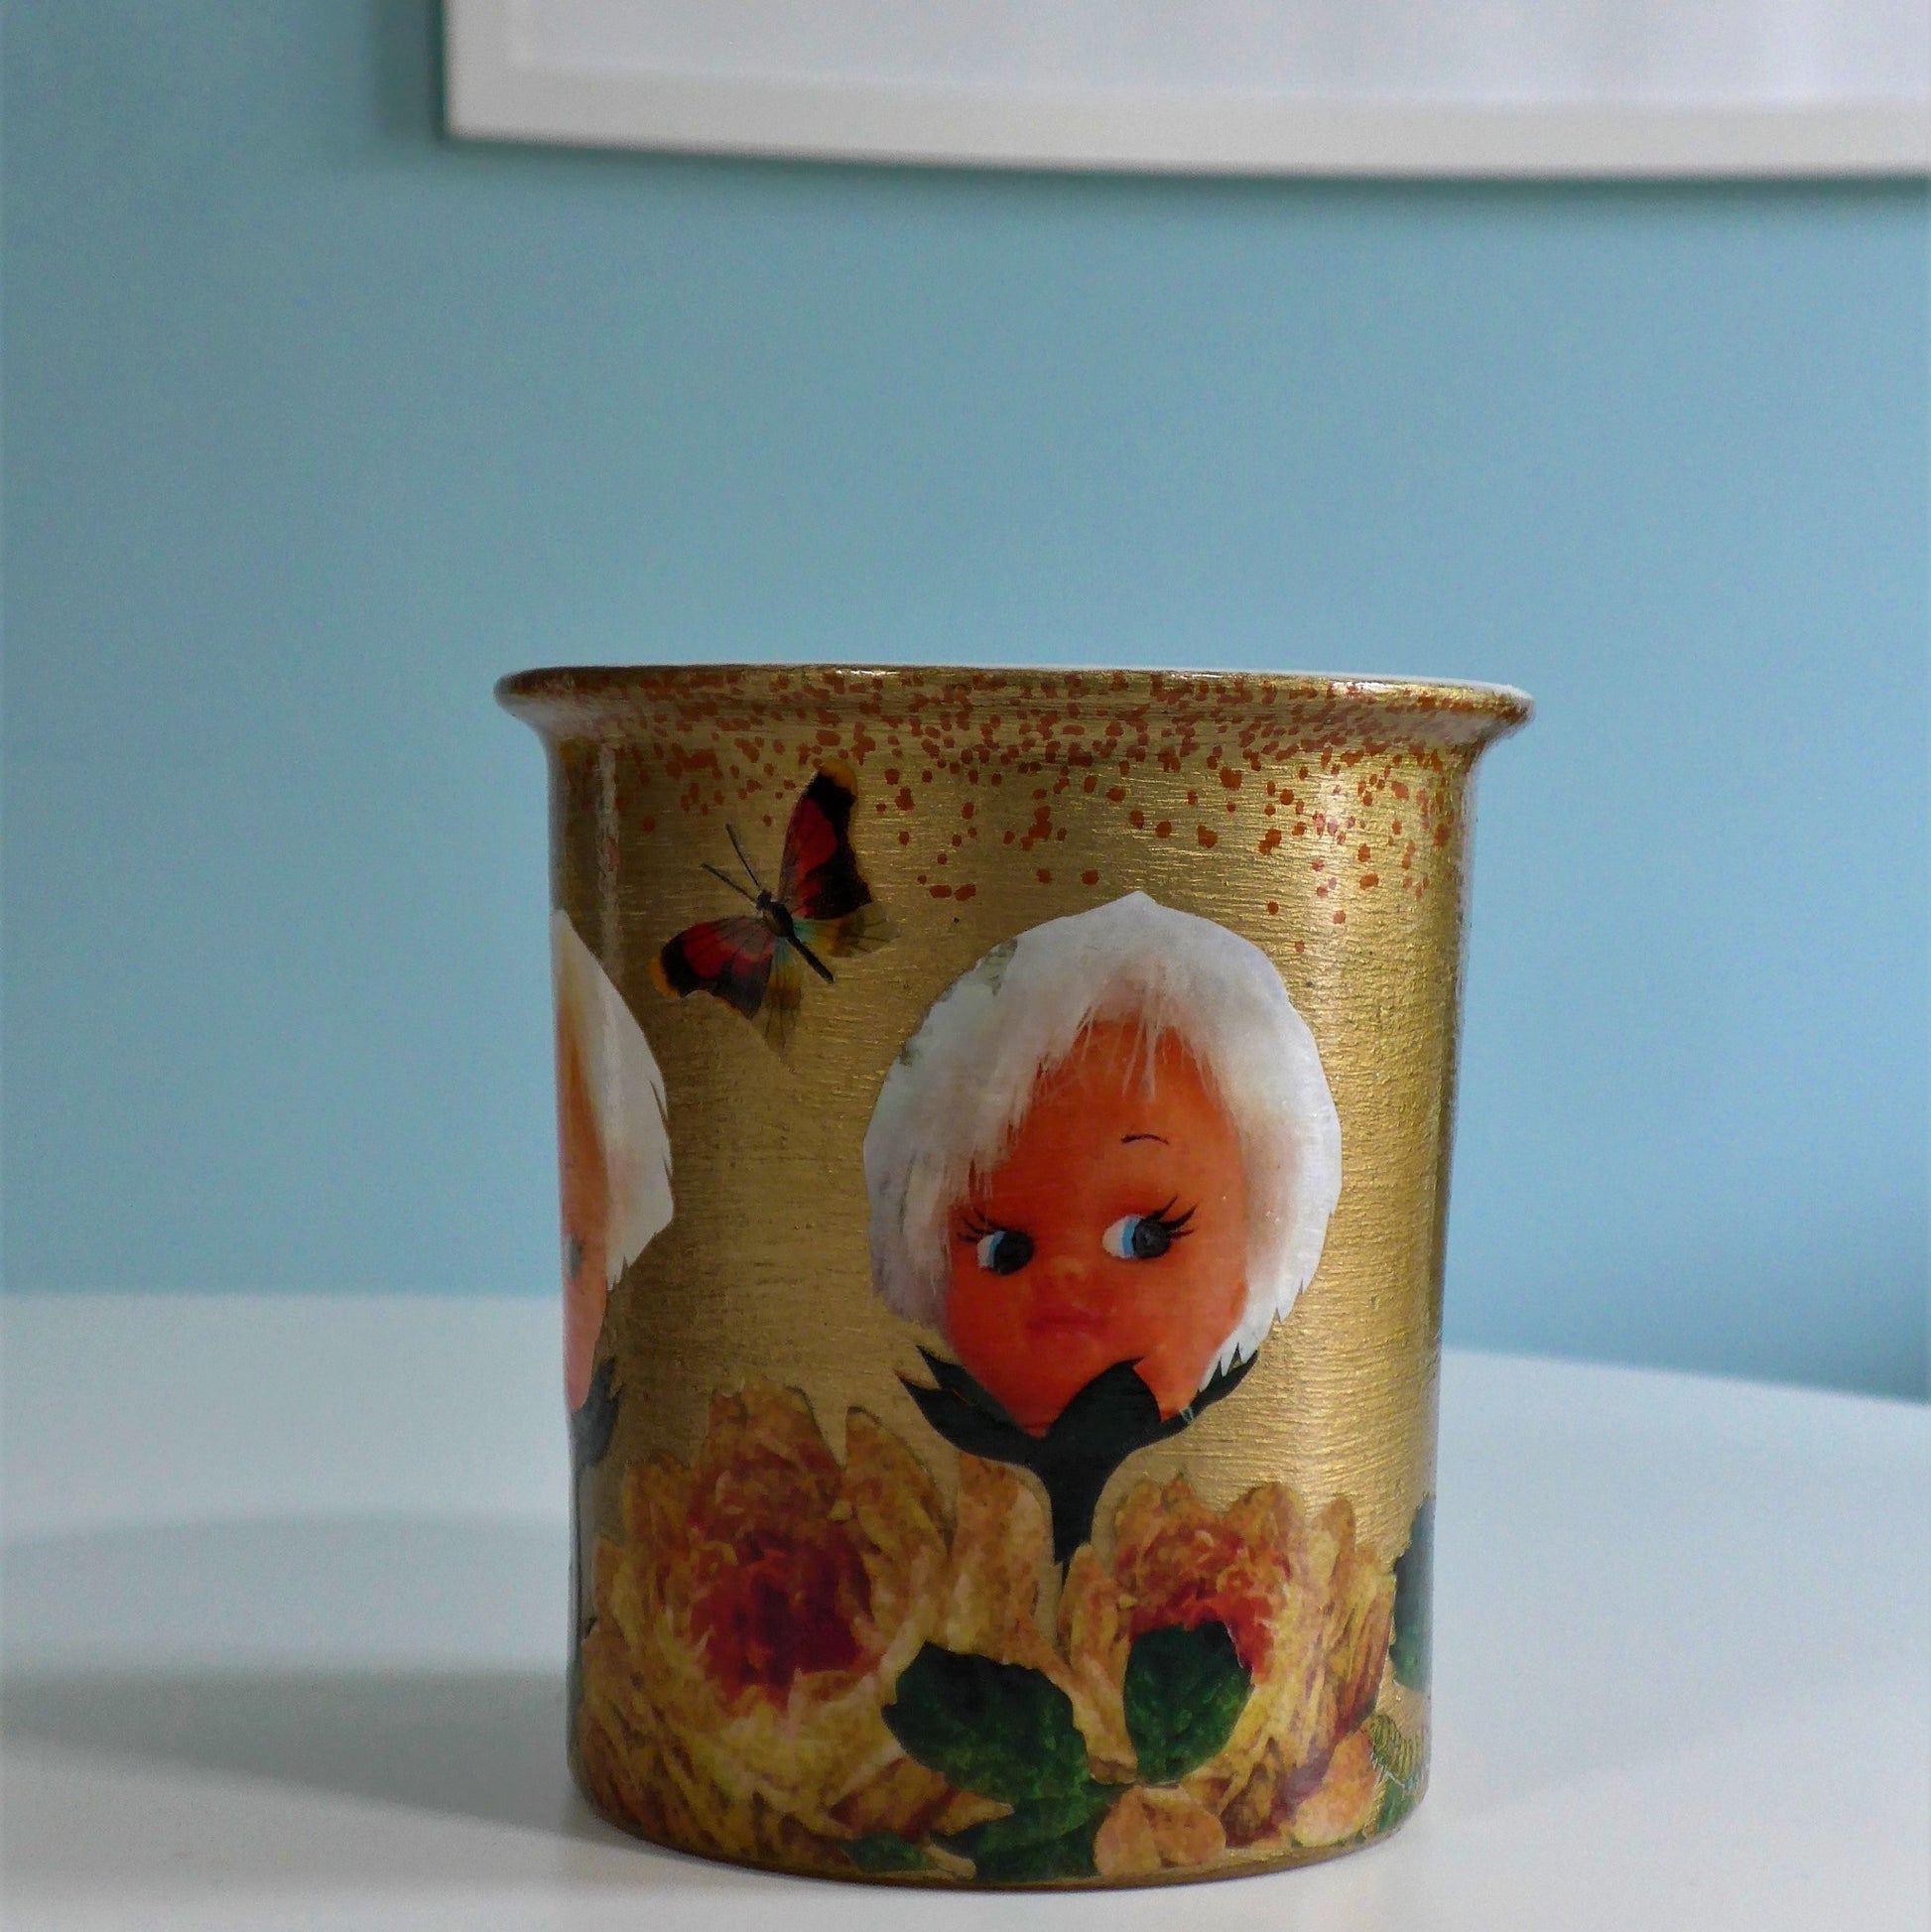 House of Frisson "Doll Face" Gold Plant Pot Flower Vase Front. Featuring flowers with doll heads, and moths, on a golden background.